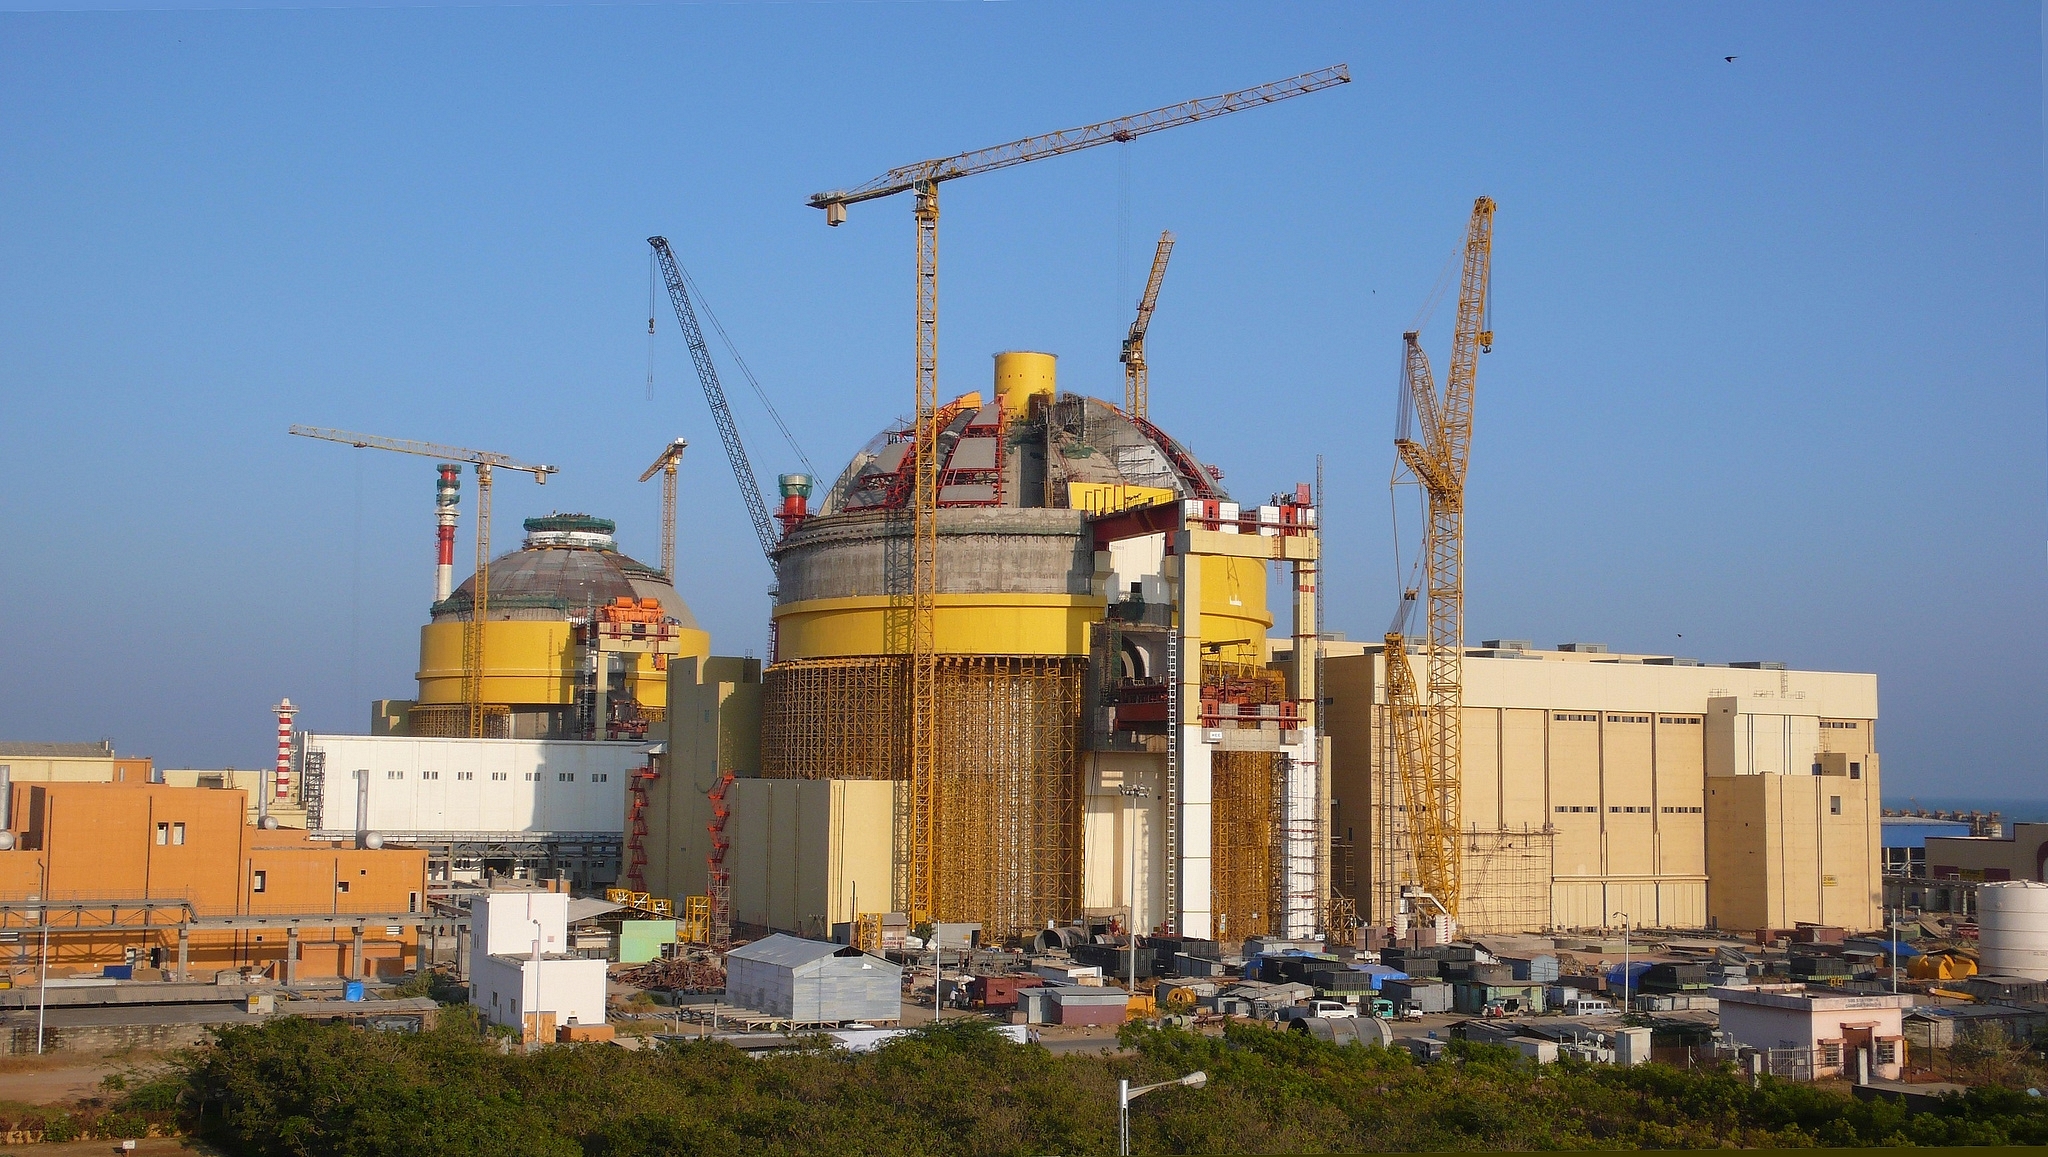 (Representative Image) Construction site of the first unit of Koodankulam Nuclear Power Plant. Picture credit: IAEA